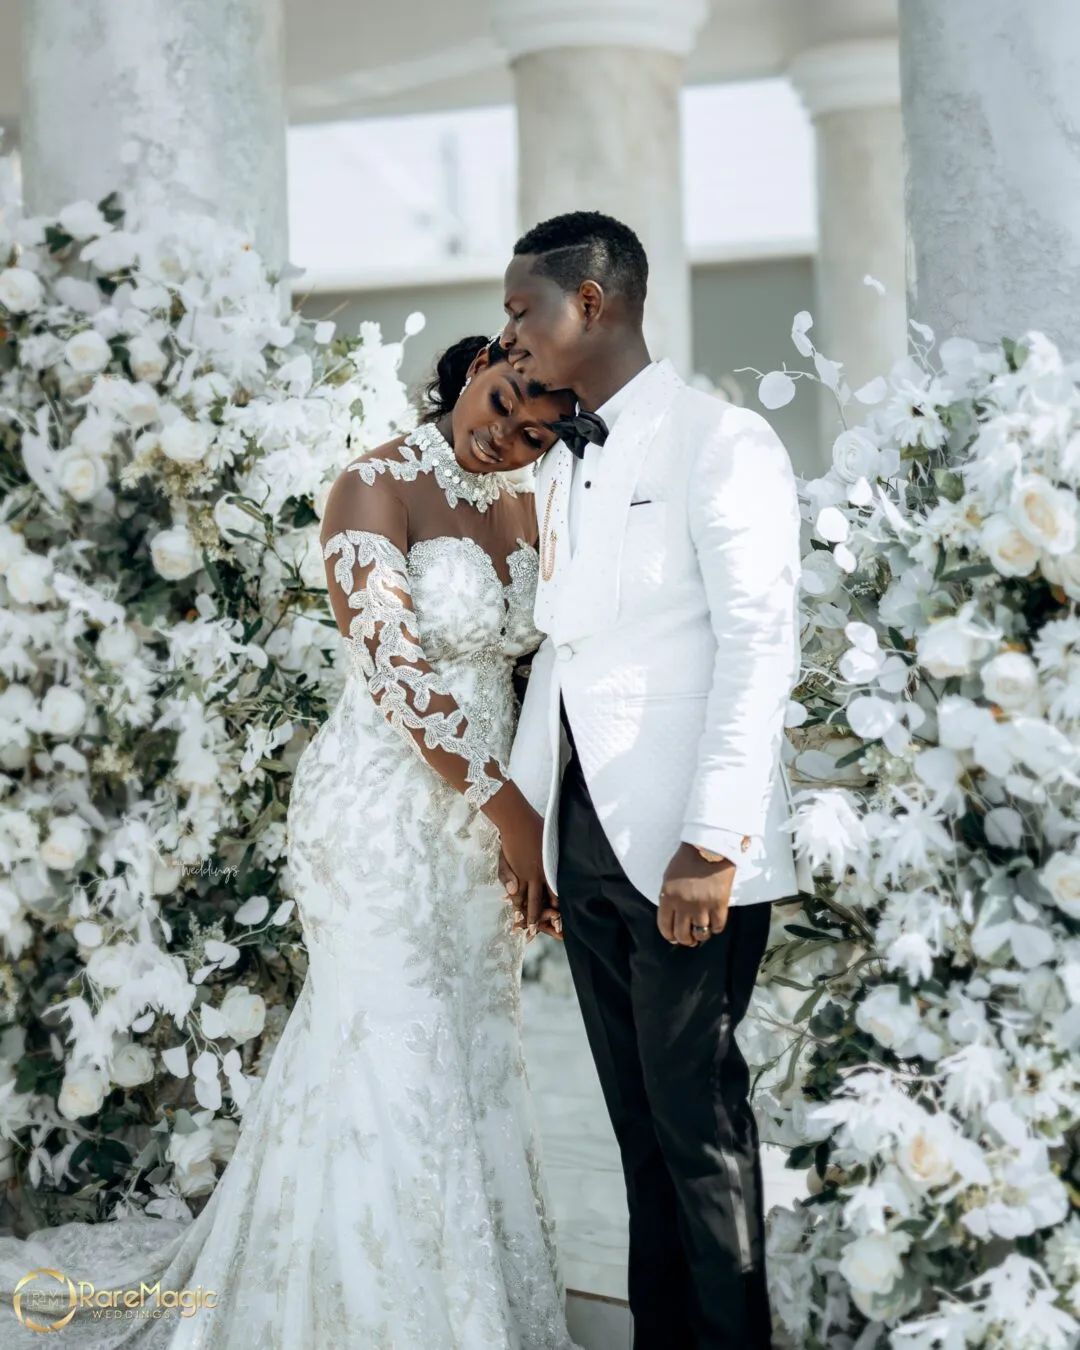 Nigerian lady weds lover she secured after shooting her shot twice through Joro Olumofin's platform - 324550281 160707966745844 1320902999241871130 n